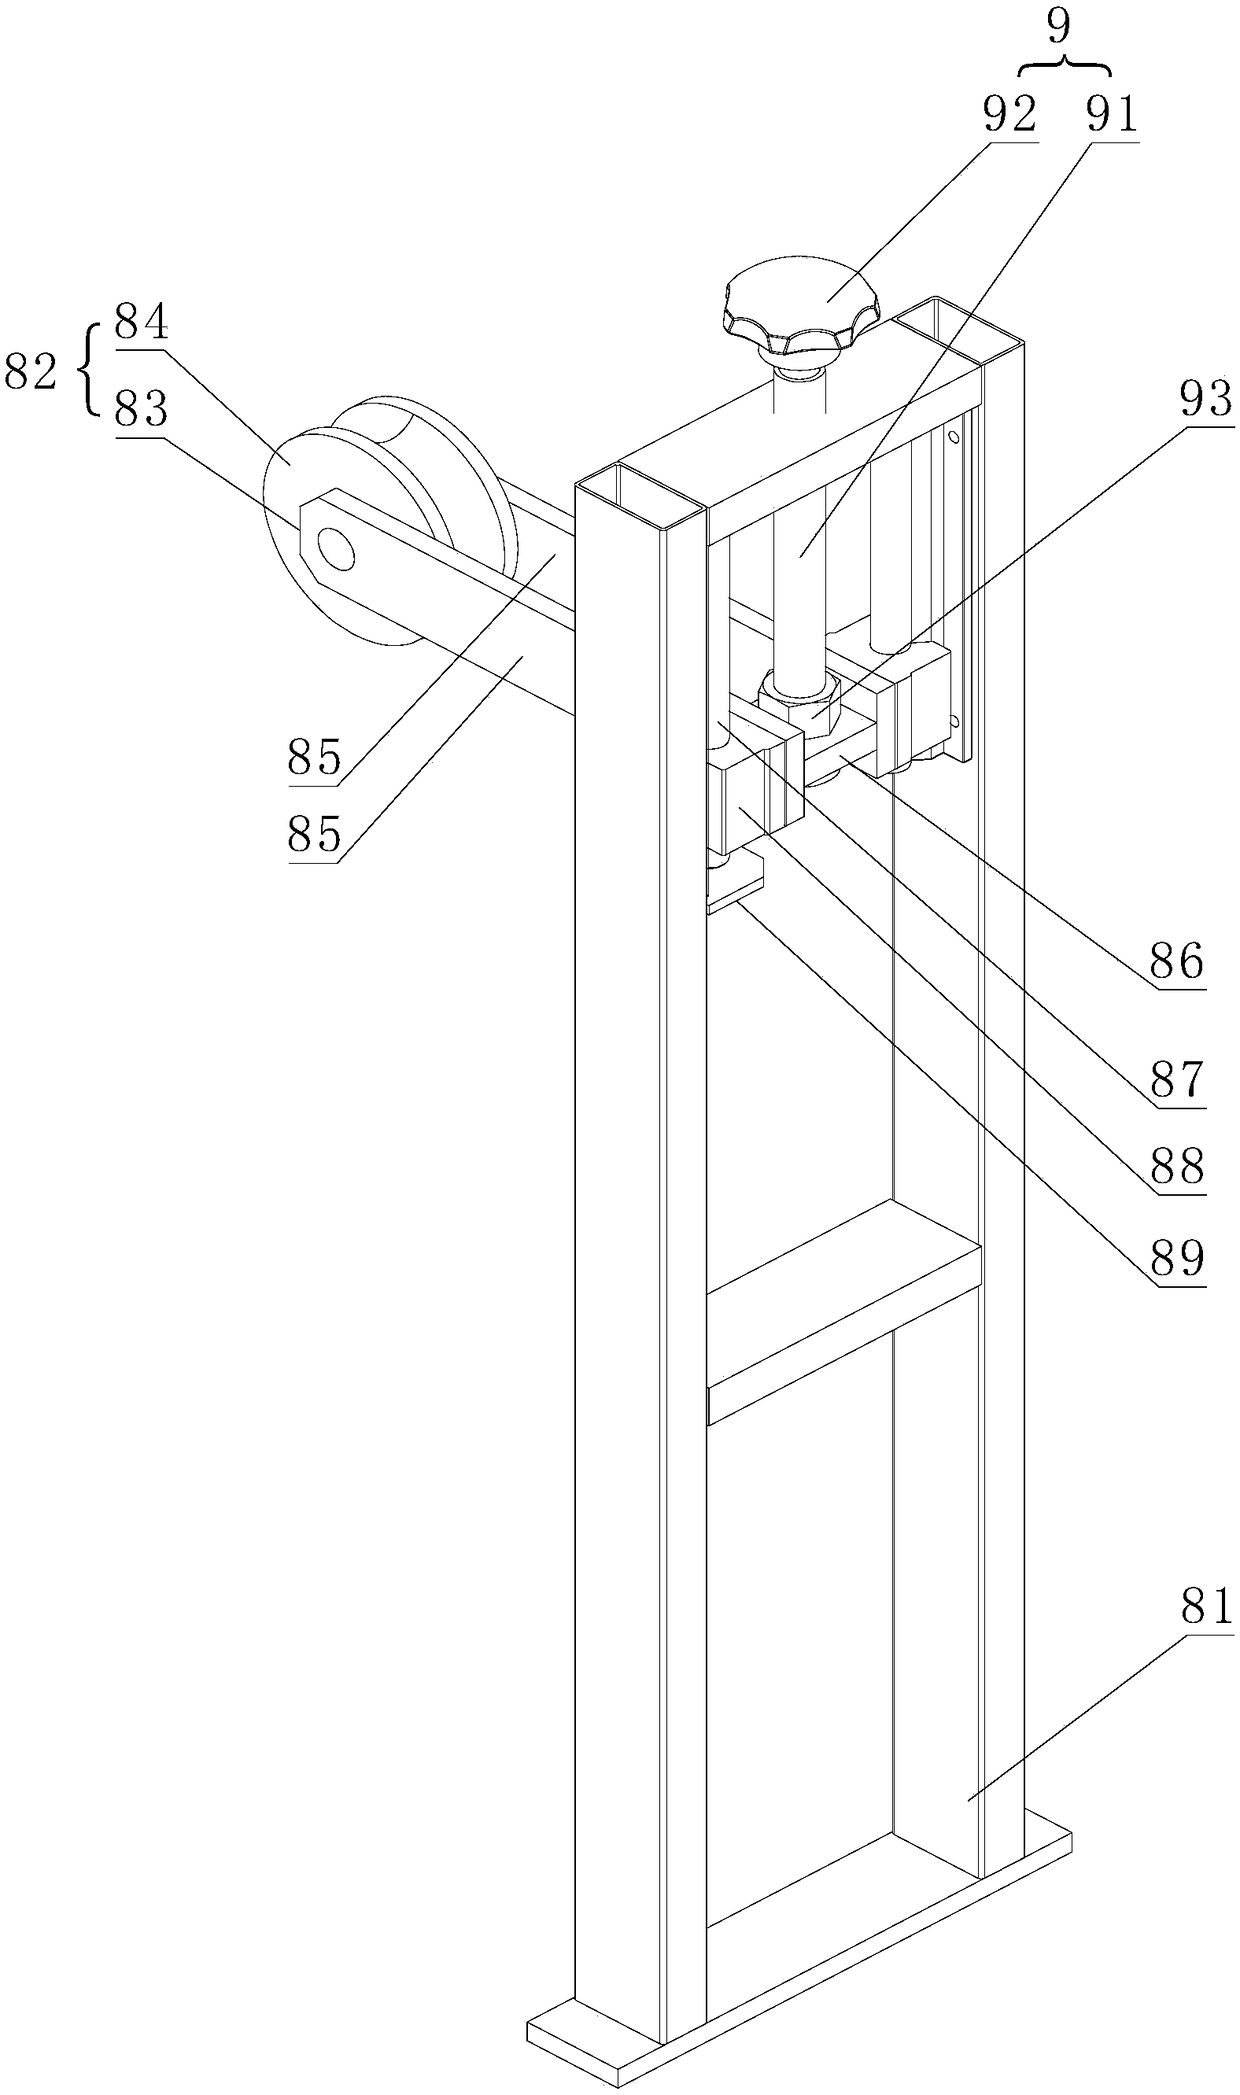 Device for testing dynamic friction coefficient